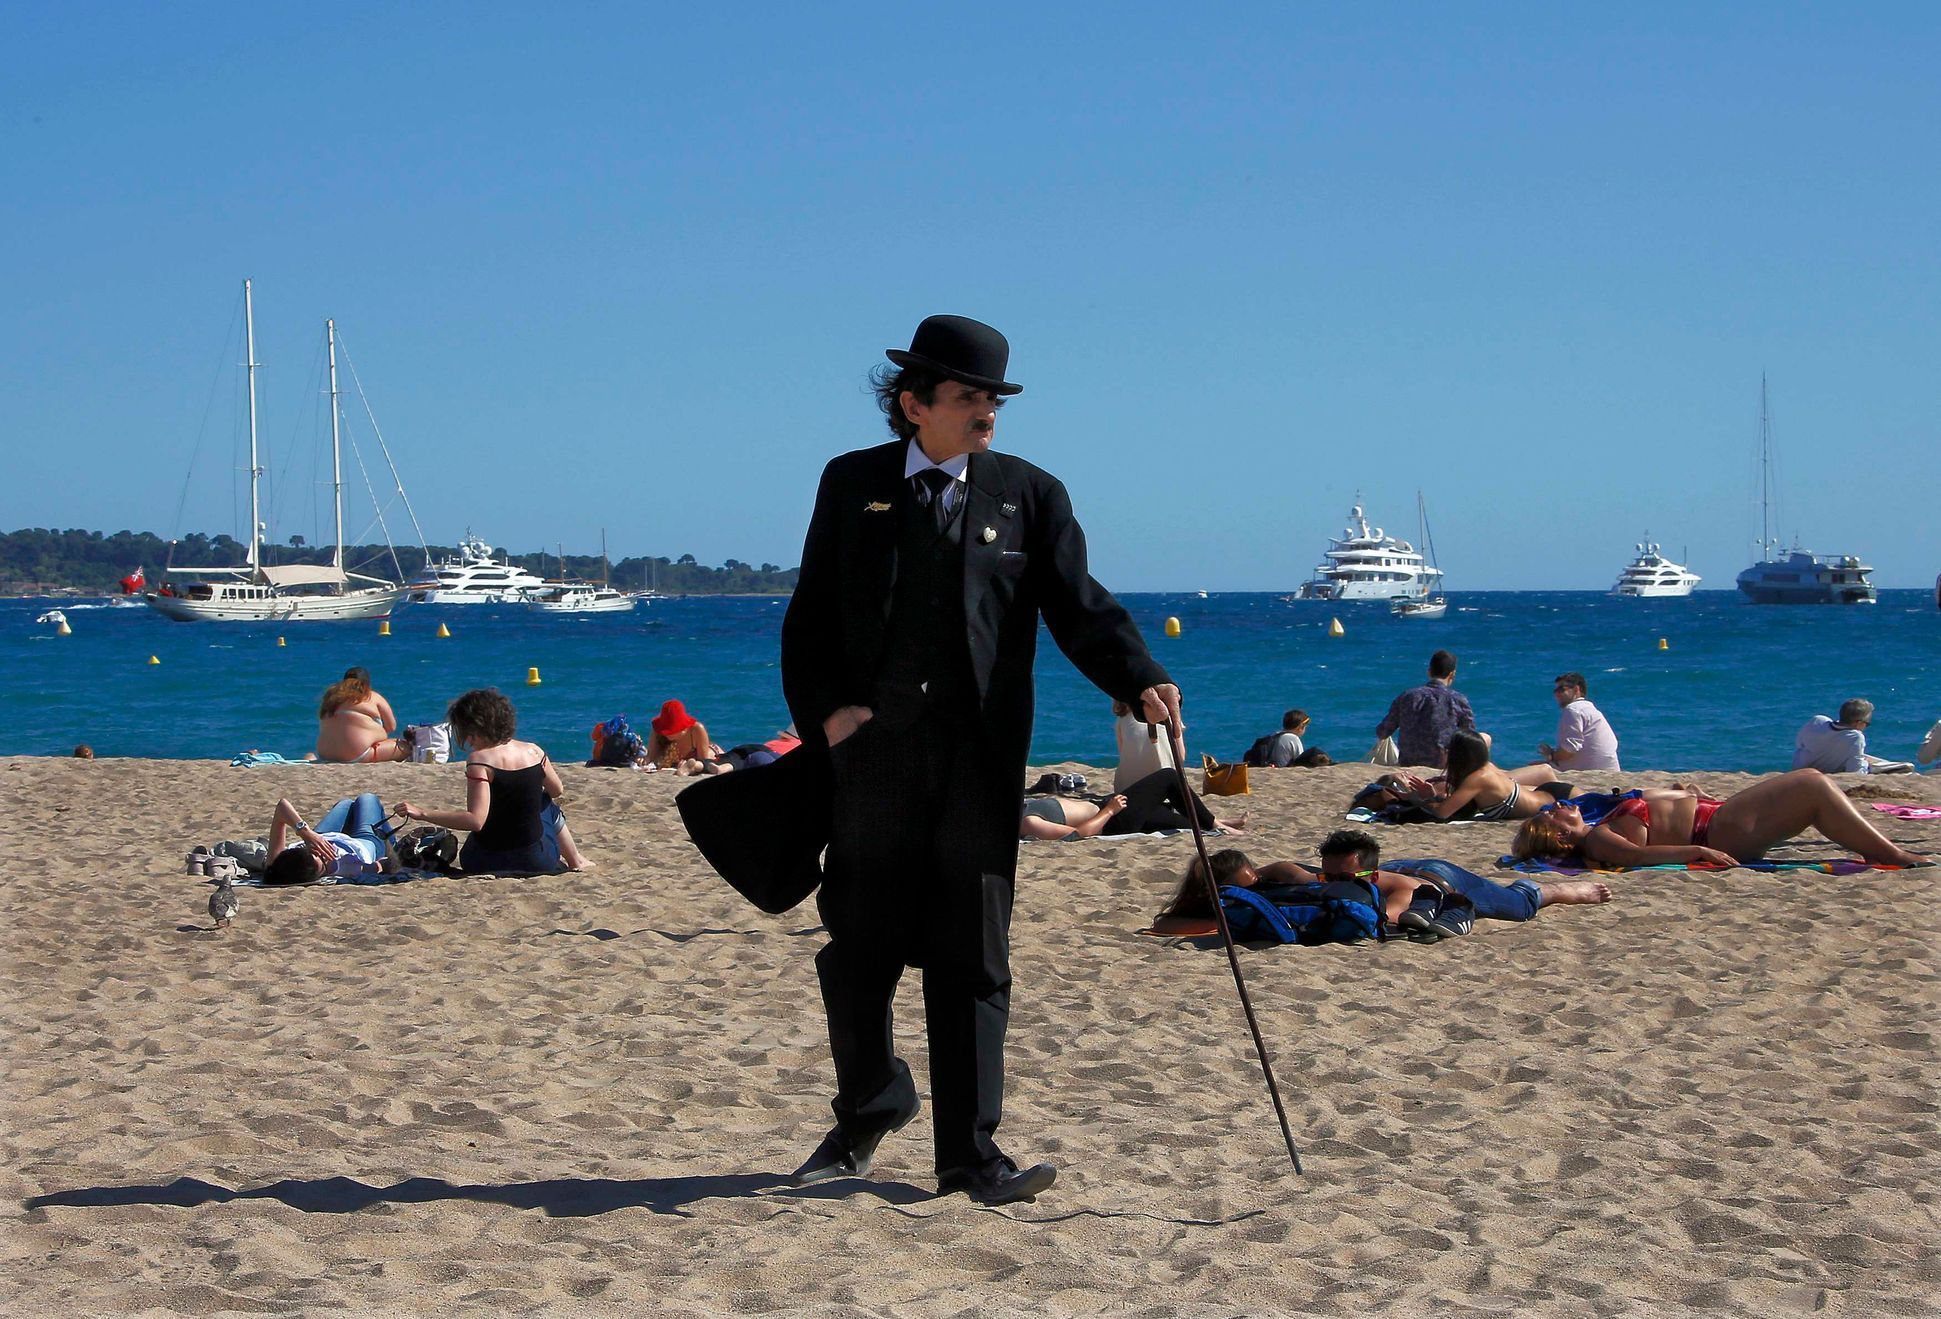 A man dressed as Charlie Chaplin walks on the beach during the 67th Cannes Film Festival in Cannes